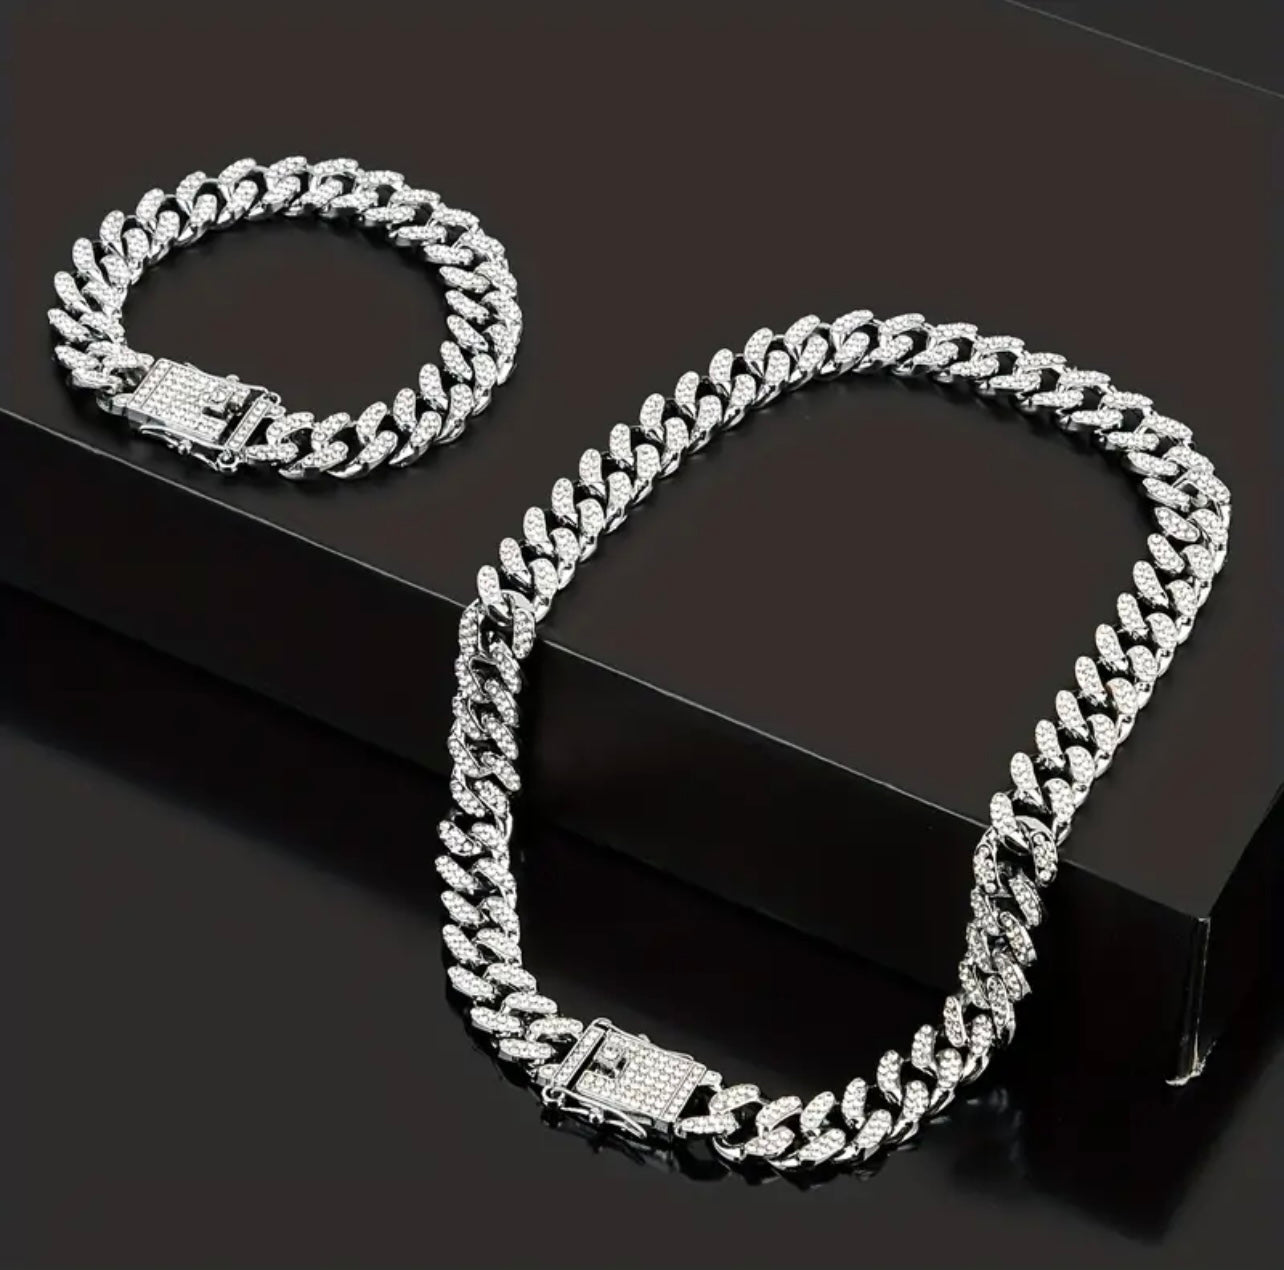 13mm silver iced out miami Cuban link neck chain bracelet for men online in pakistan